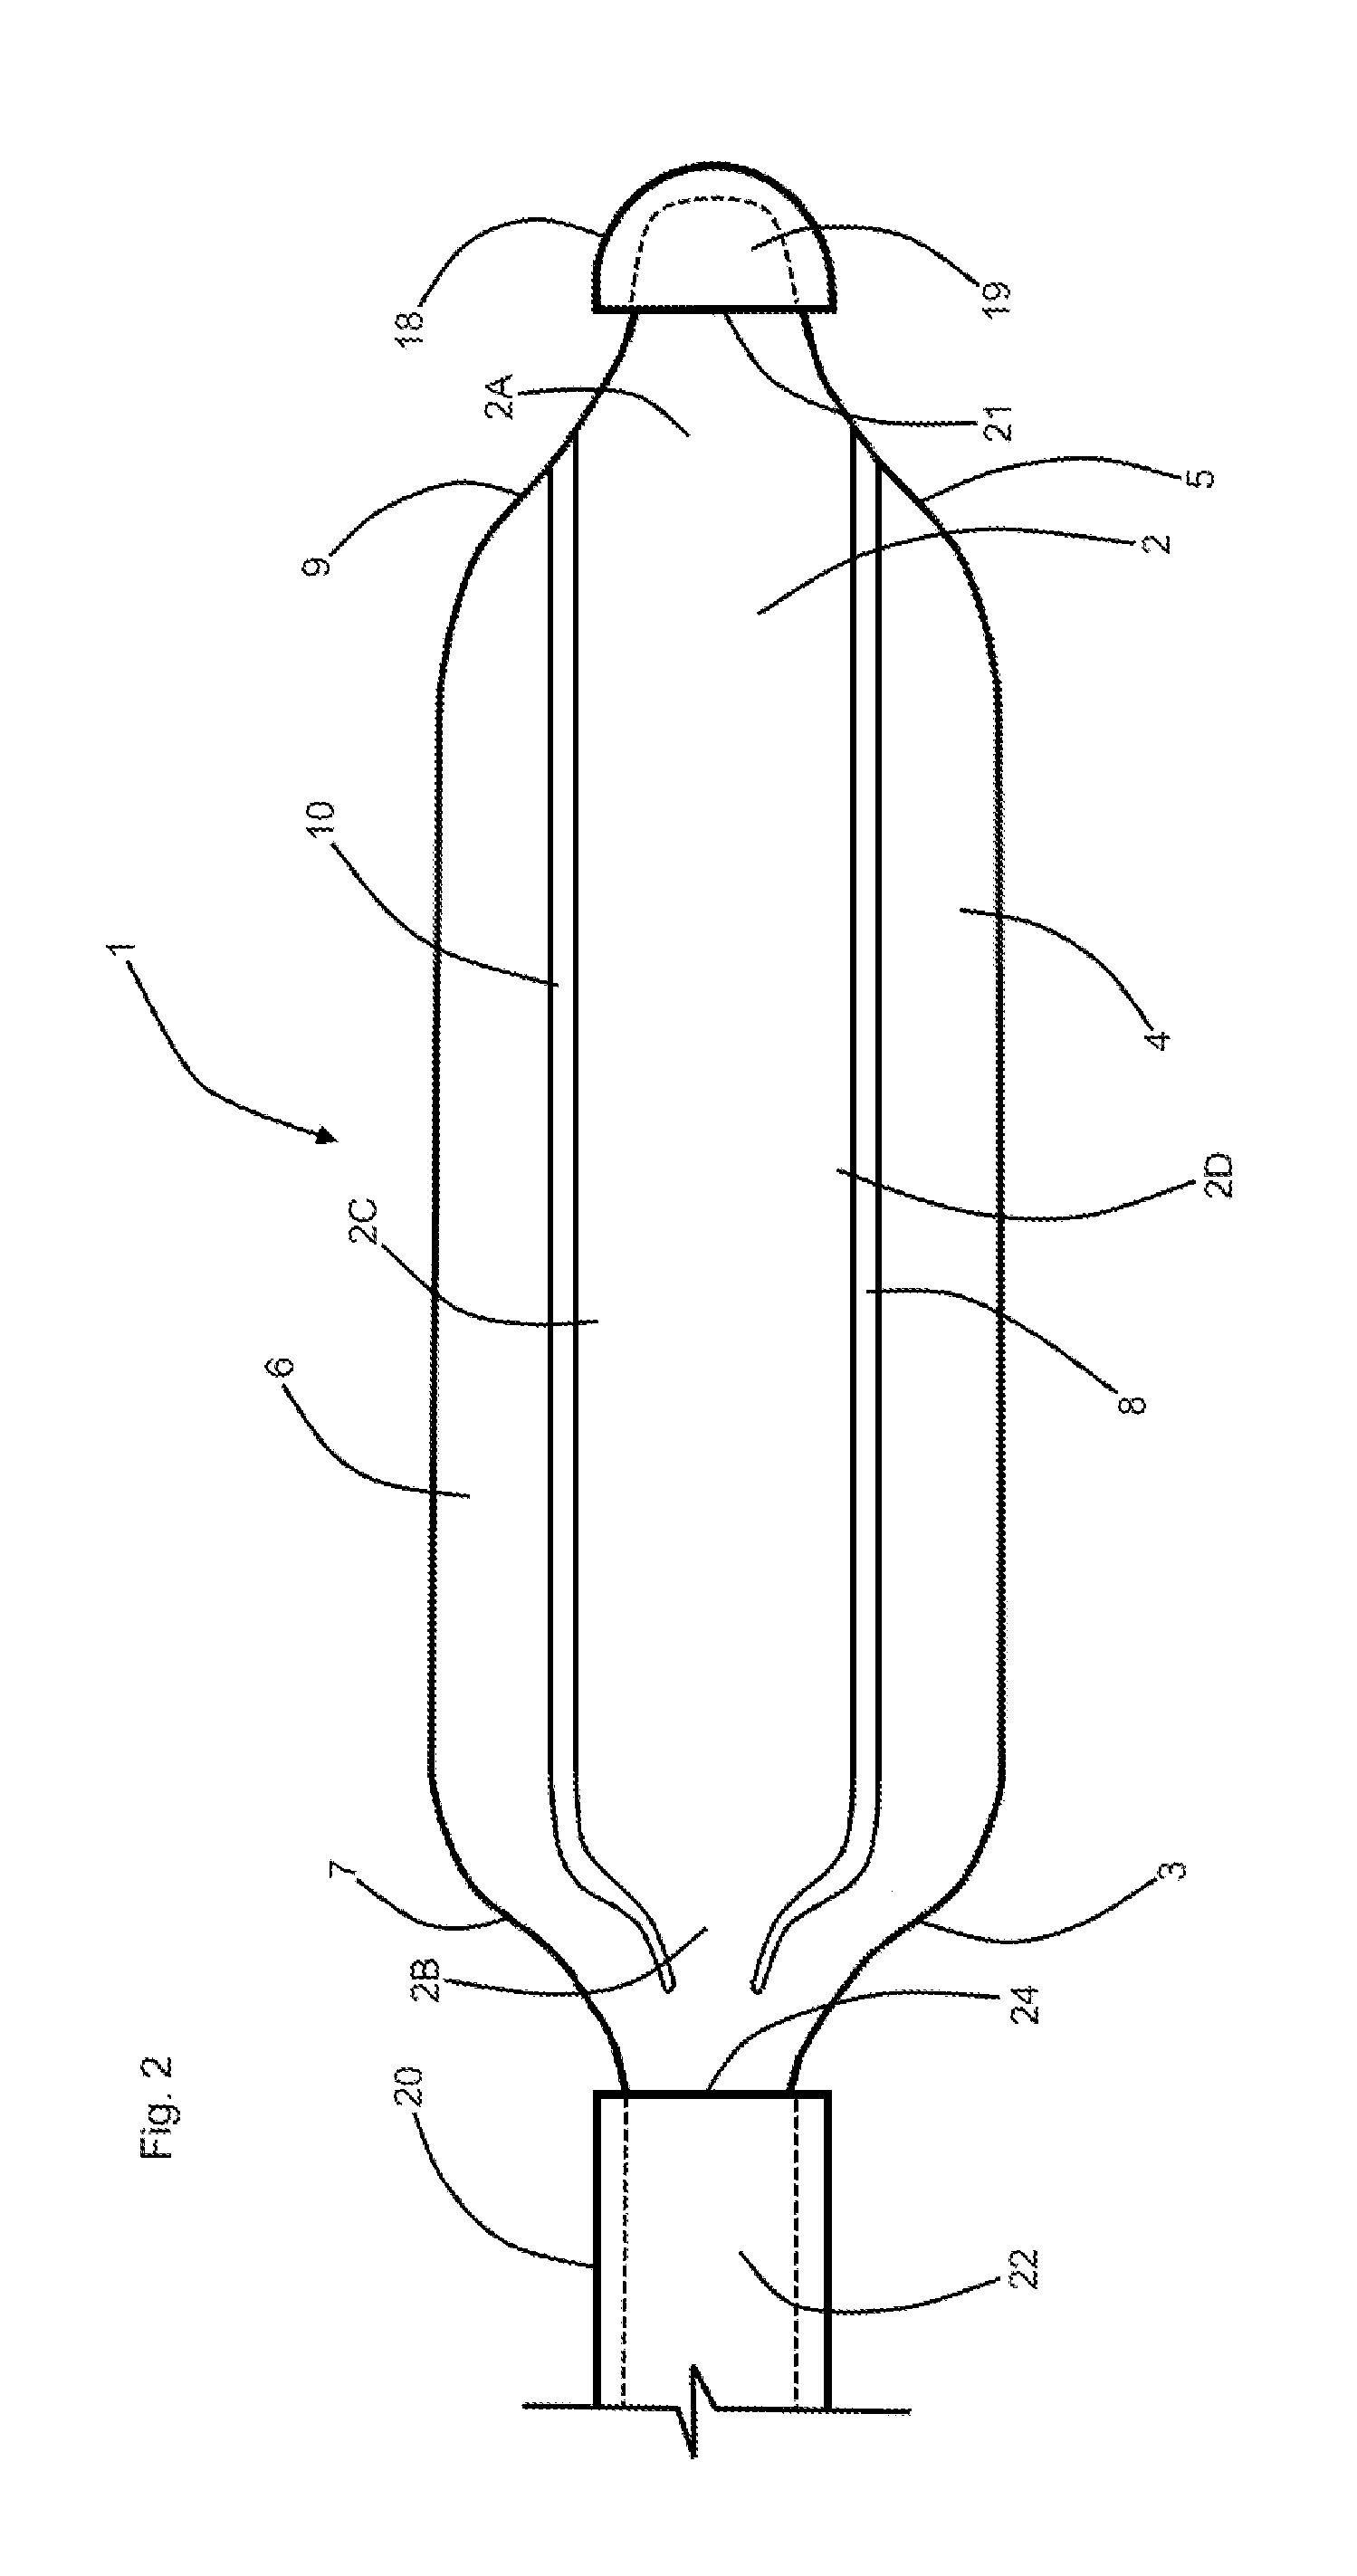 Assembly For Pain Suppressing Electrical Stimulation of a Patient's Nerve